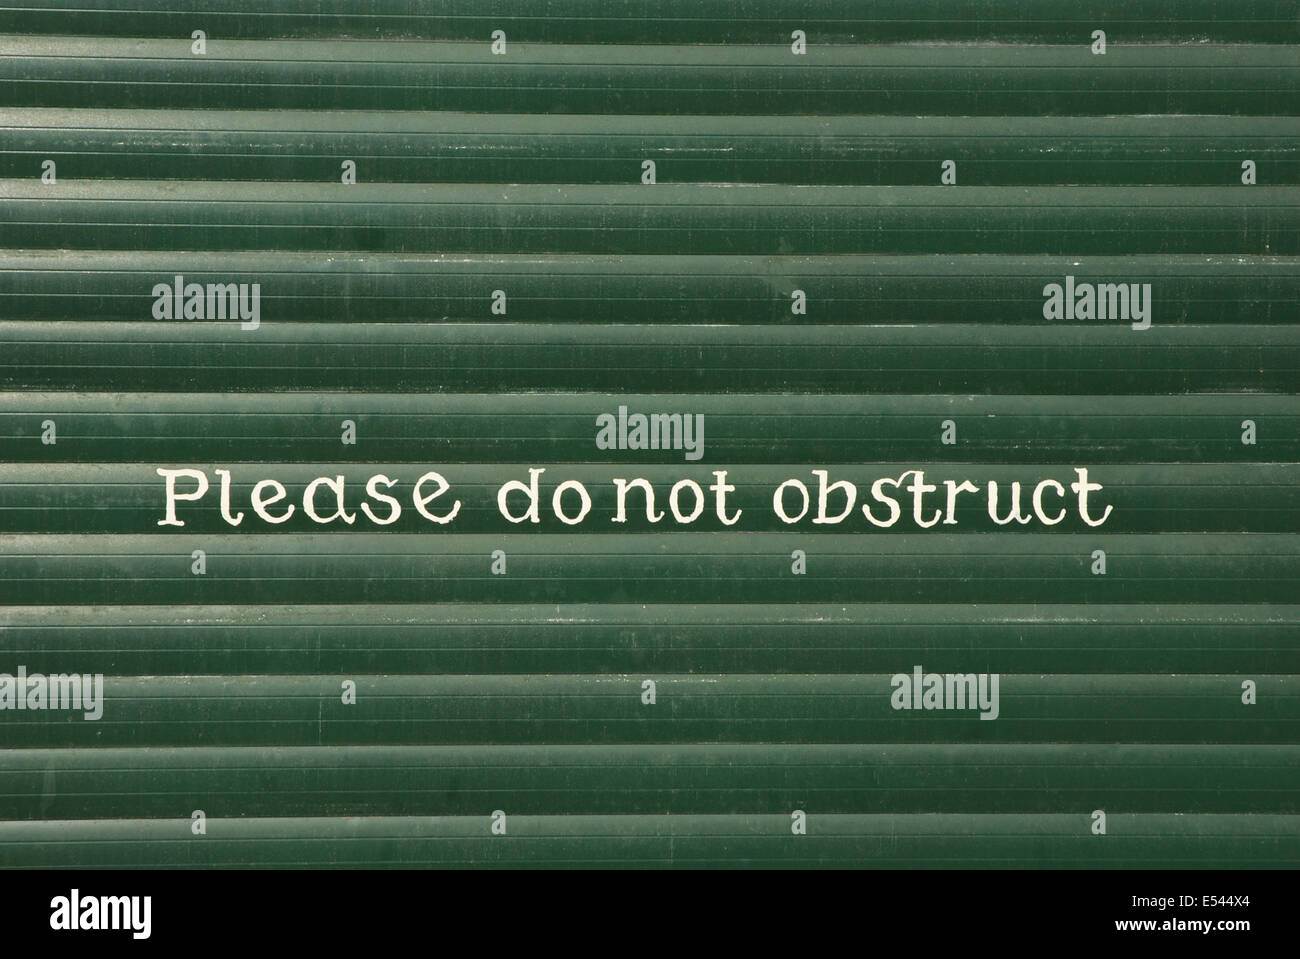 Sign - Please do not obstruct - painted on garage door Stock Photo